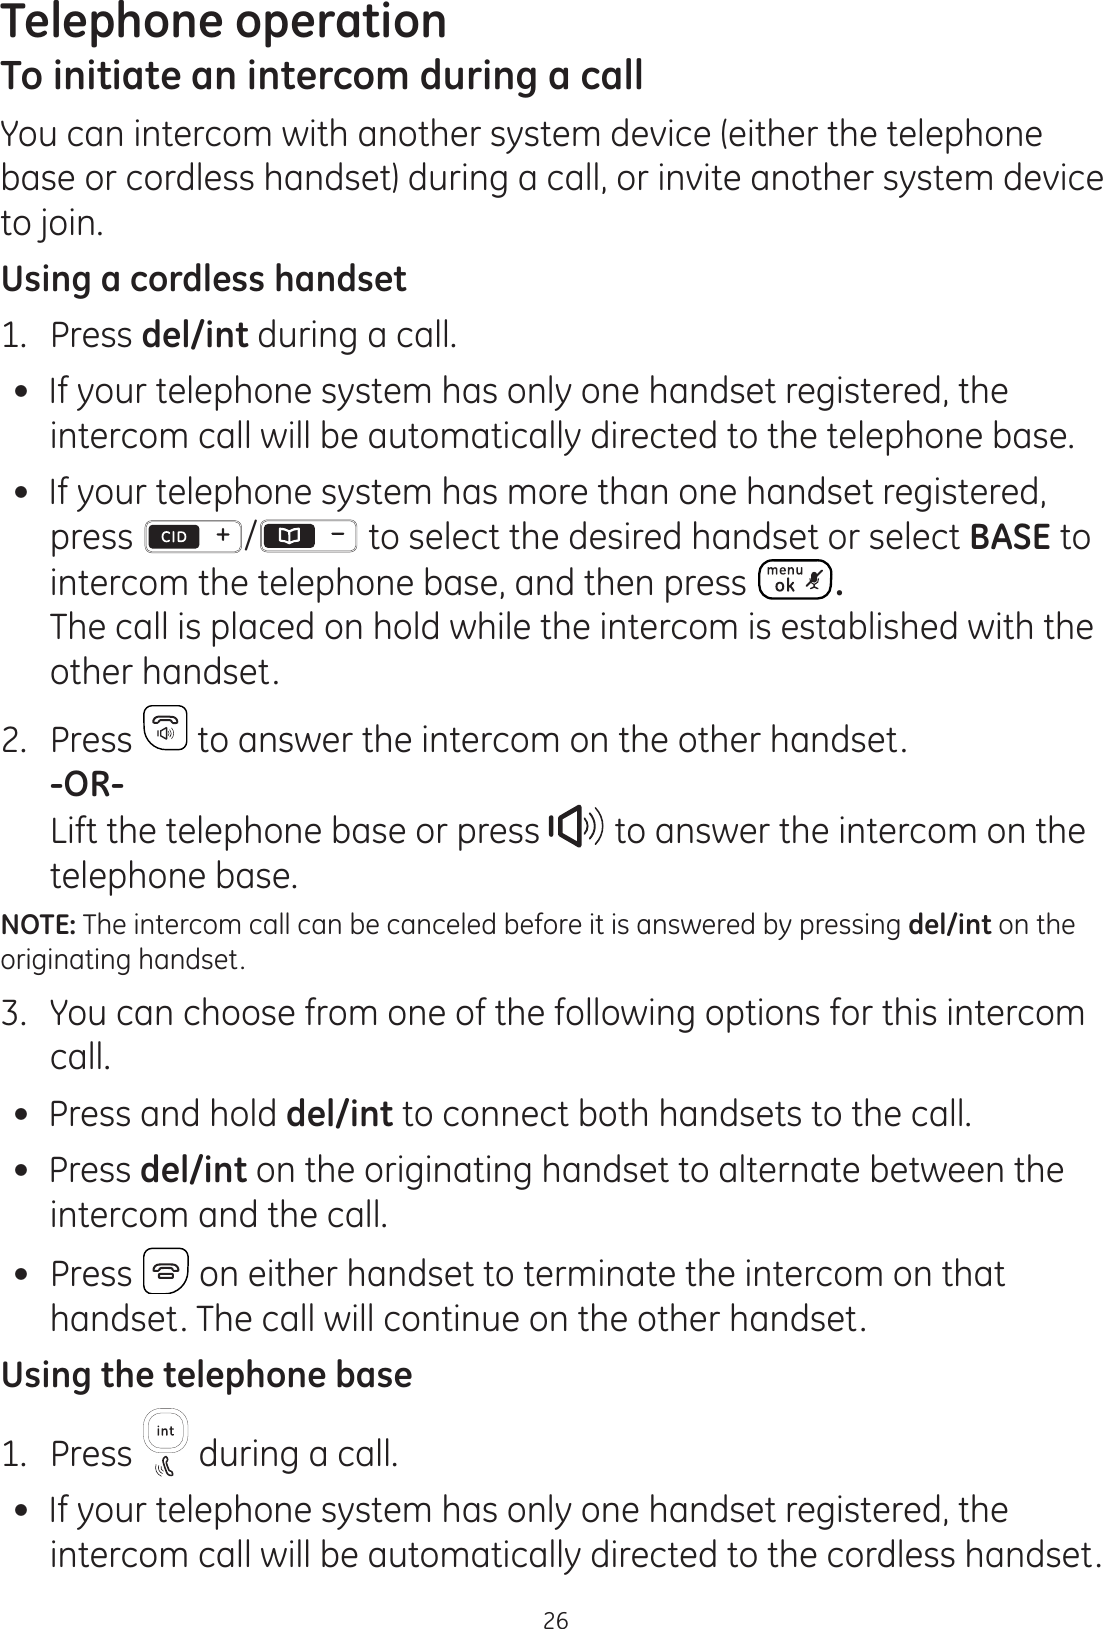 Telephone operation26To initiate an intercom during a callYou can intercom with another system device (either the telephone base or cordless handset) during a call, or invite another system device to join.Using a cordless handset1.  Press del/int during a call.  If your telephone system has only one handset registered, the intercom call will be automatically directed to the telephone base. If your telephone system has more than one handset registered, press /  to select the desired handset or select BASE to intercom the telephone base, and then press  .  The call is placed on hold while the intercom is established with the other handset.2.  Press   to answer the intercom on the other handset.  -OR-  Lift the telephone base or press   to answer the intercom on the telephone base. NOTE: The intercom call can be canceled before it is answered by pressing del/int on the originating handset.3.  You can choose from one of the following options for this intercom call.  Press and hold del/int to connect both handsets to the call. Press del/int on the originating handset to alternate between the  intercom and the call.   Press   on either handset to terminate the intercom on that handset. The call will continue on the other handset.Using the telephone base1.  Press   during a call.  If your telephone system has only one handset registered, the intercom call will be automatically directed to the cordless handset.